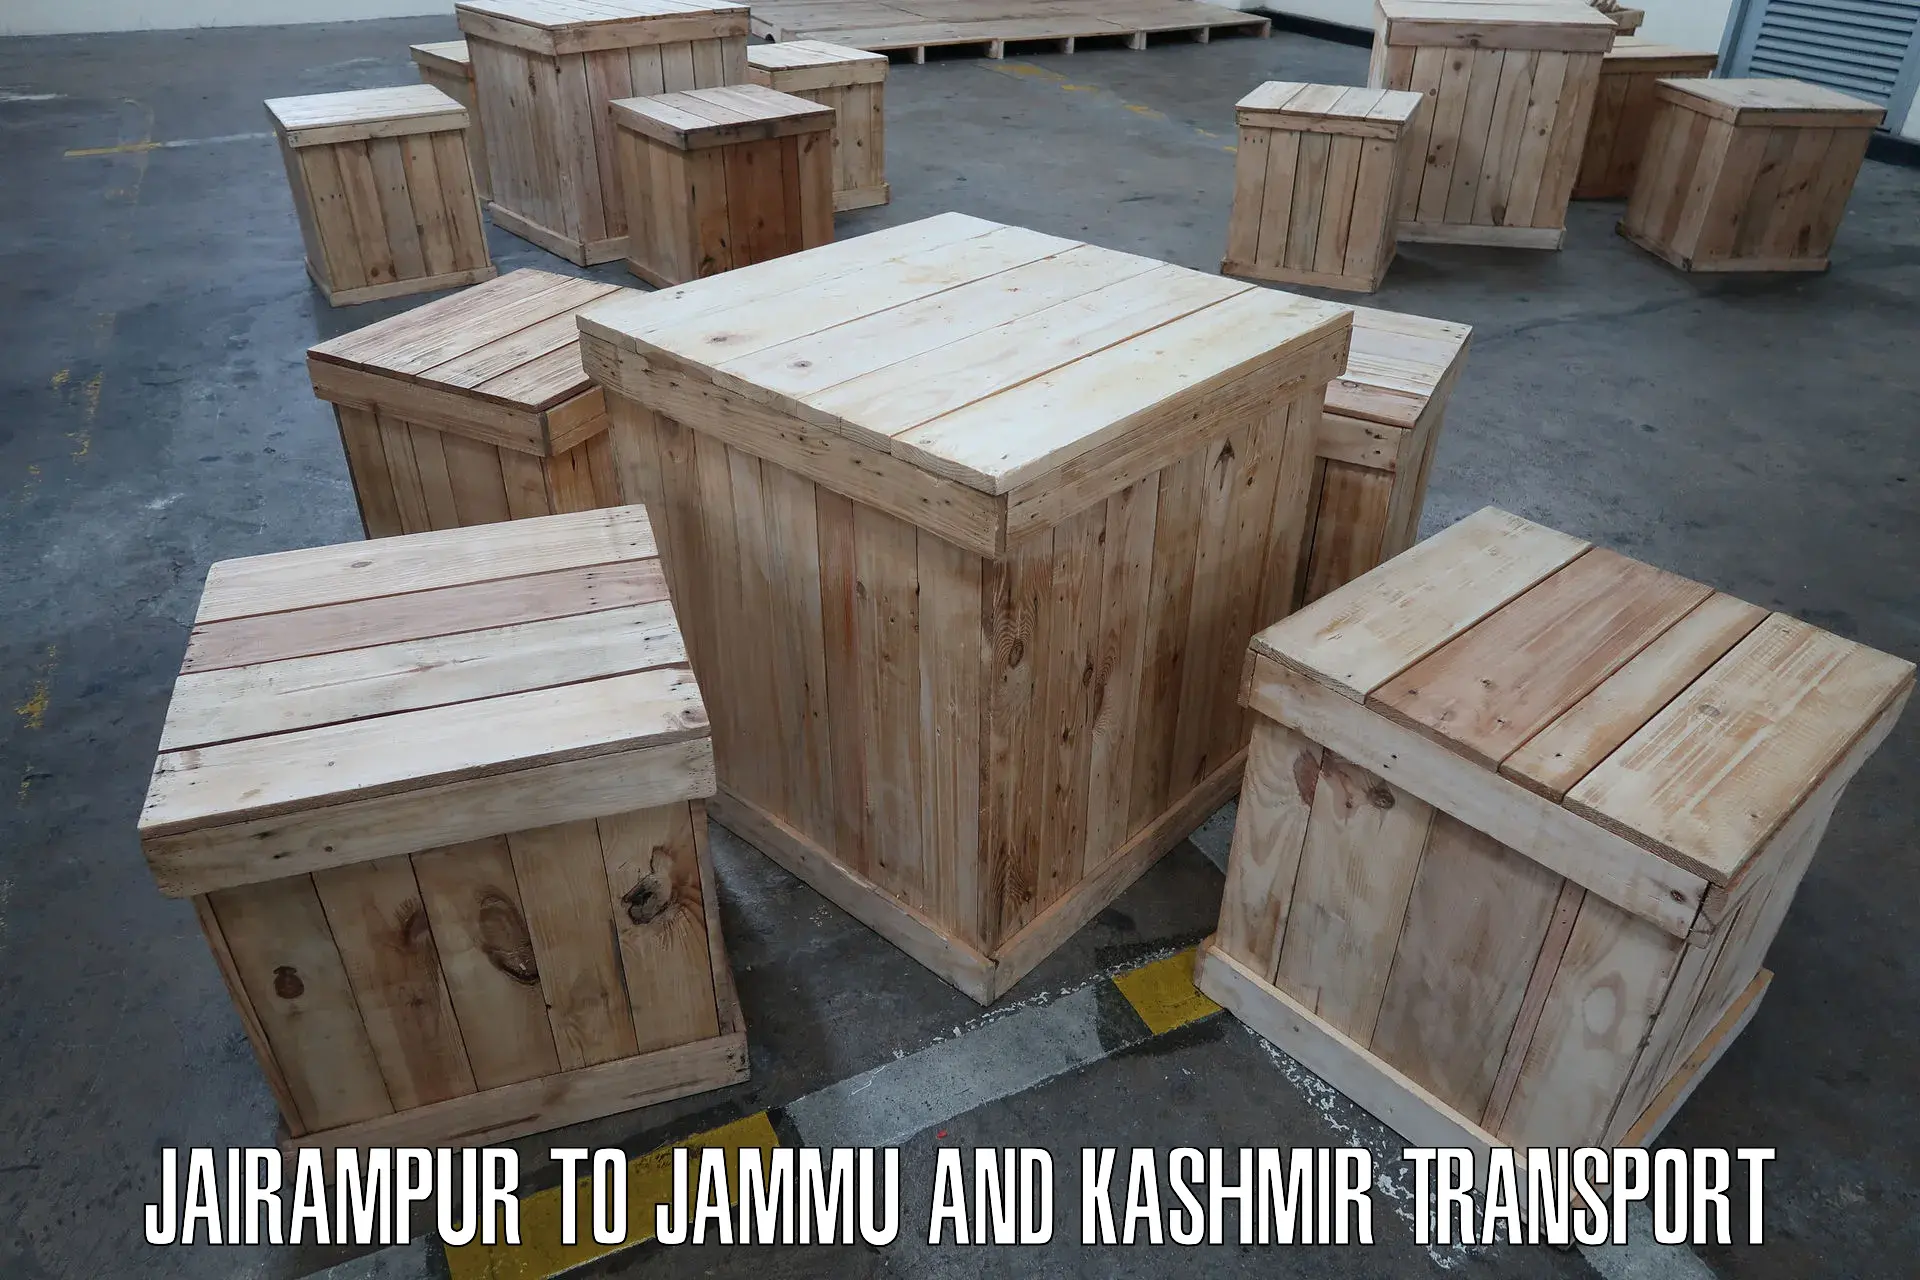 Delivery service Jairampur to Jammu and Kashmir